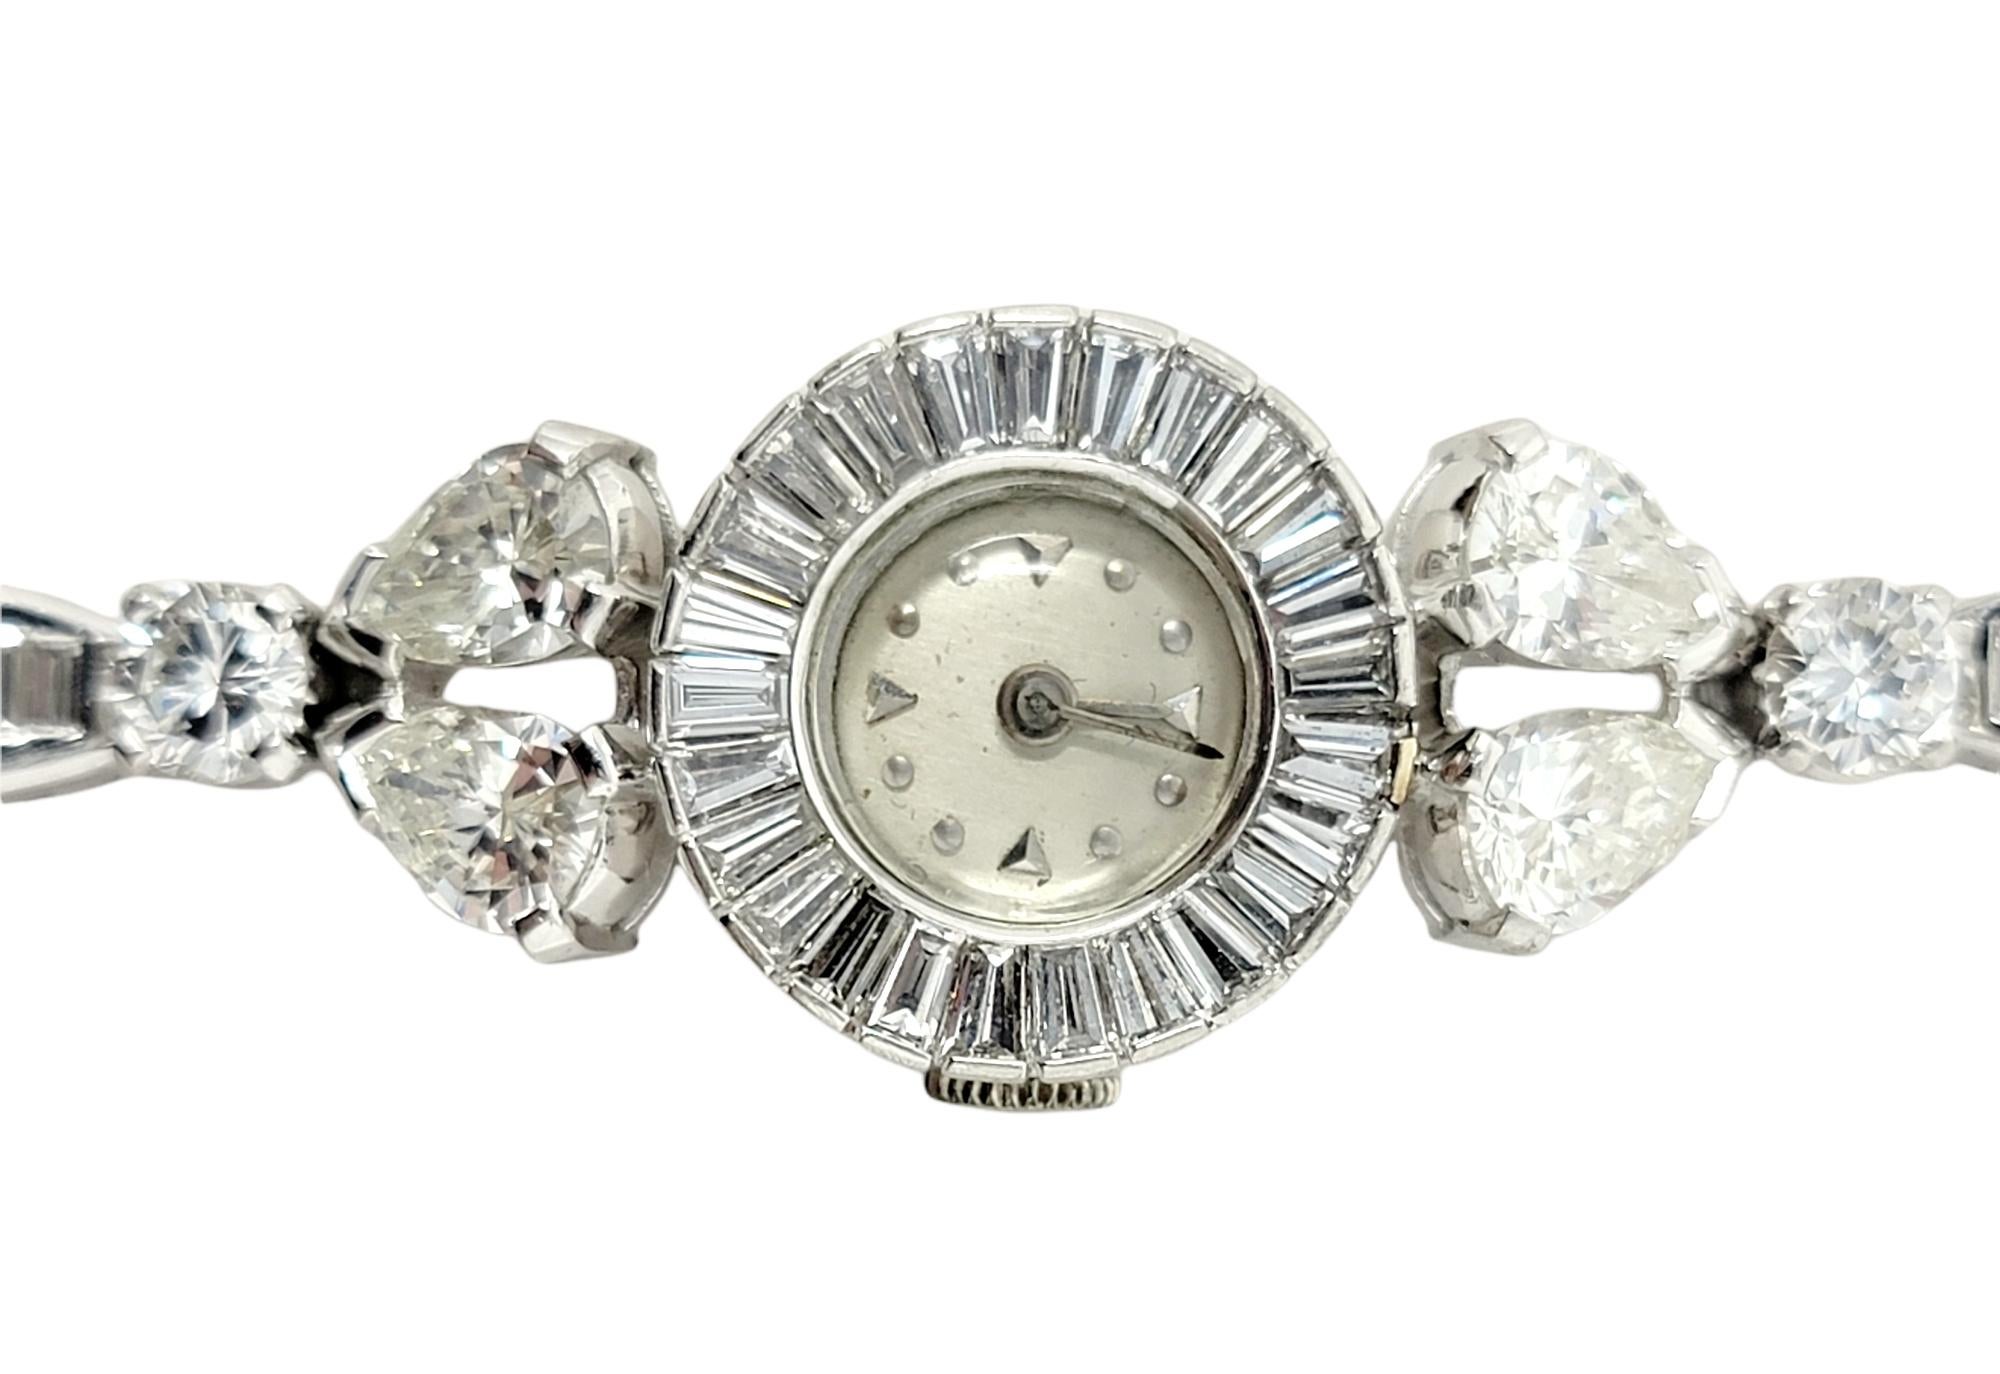 Exquisite vintage wristwatch embellished with 9.23 carats of glittering natural diamonds. Featuring flexible, elongated platinum links, the glittering bracelet gently wraps the wrist, showcasing the 84 sparkling diamonds that shimmer and shine from